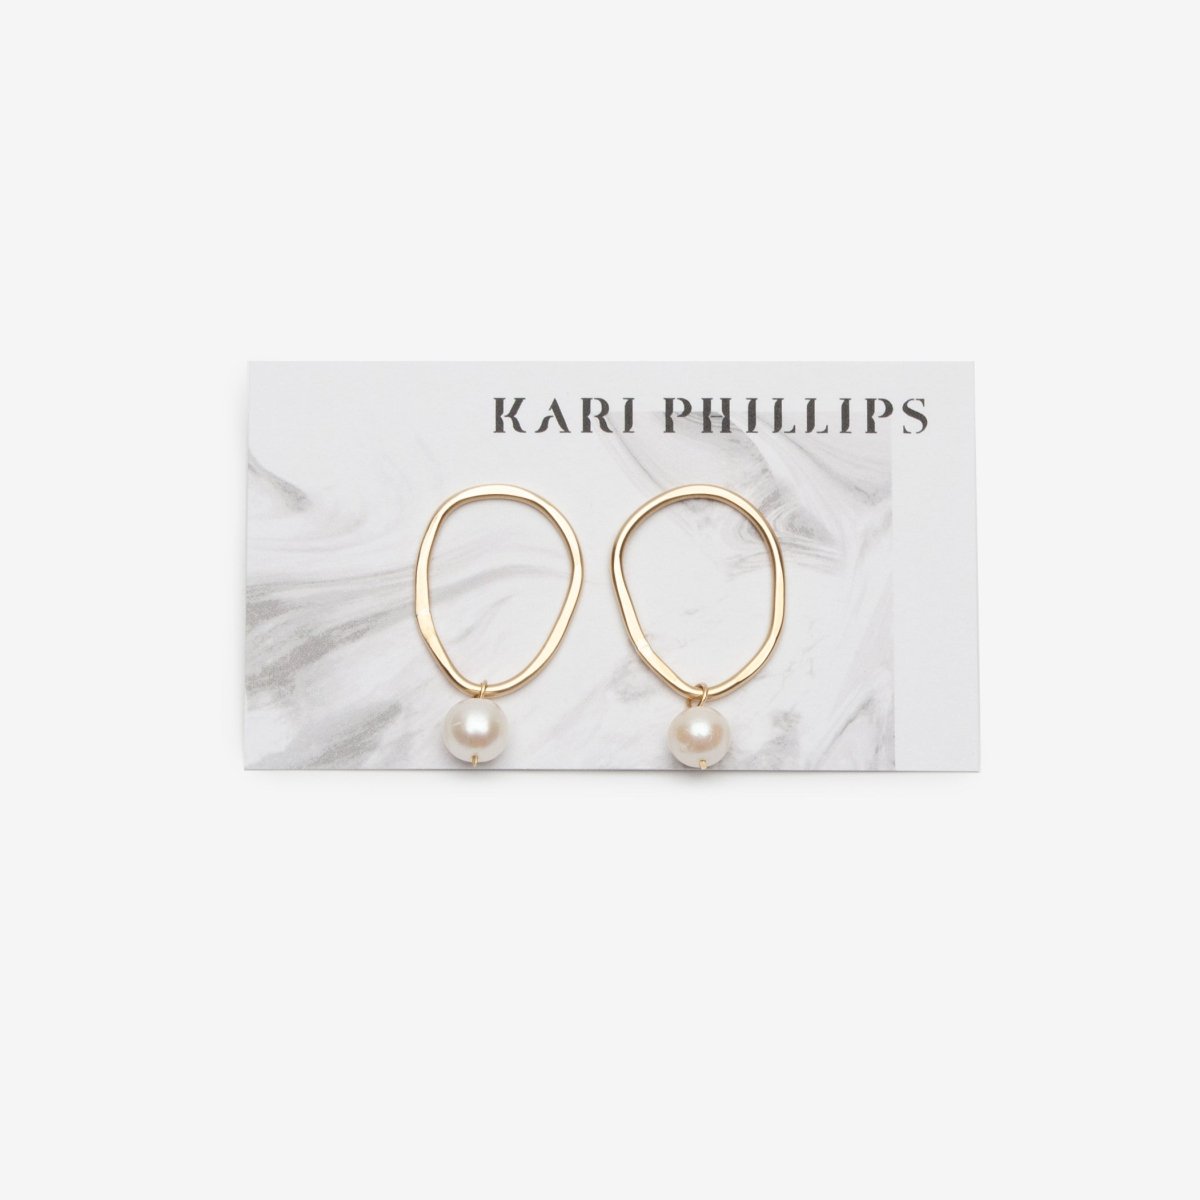 Brass organic oval shaped earrings with a pearl attached at the bottom. Made in Portland by artist Kari Phillips.